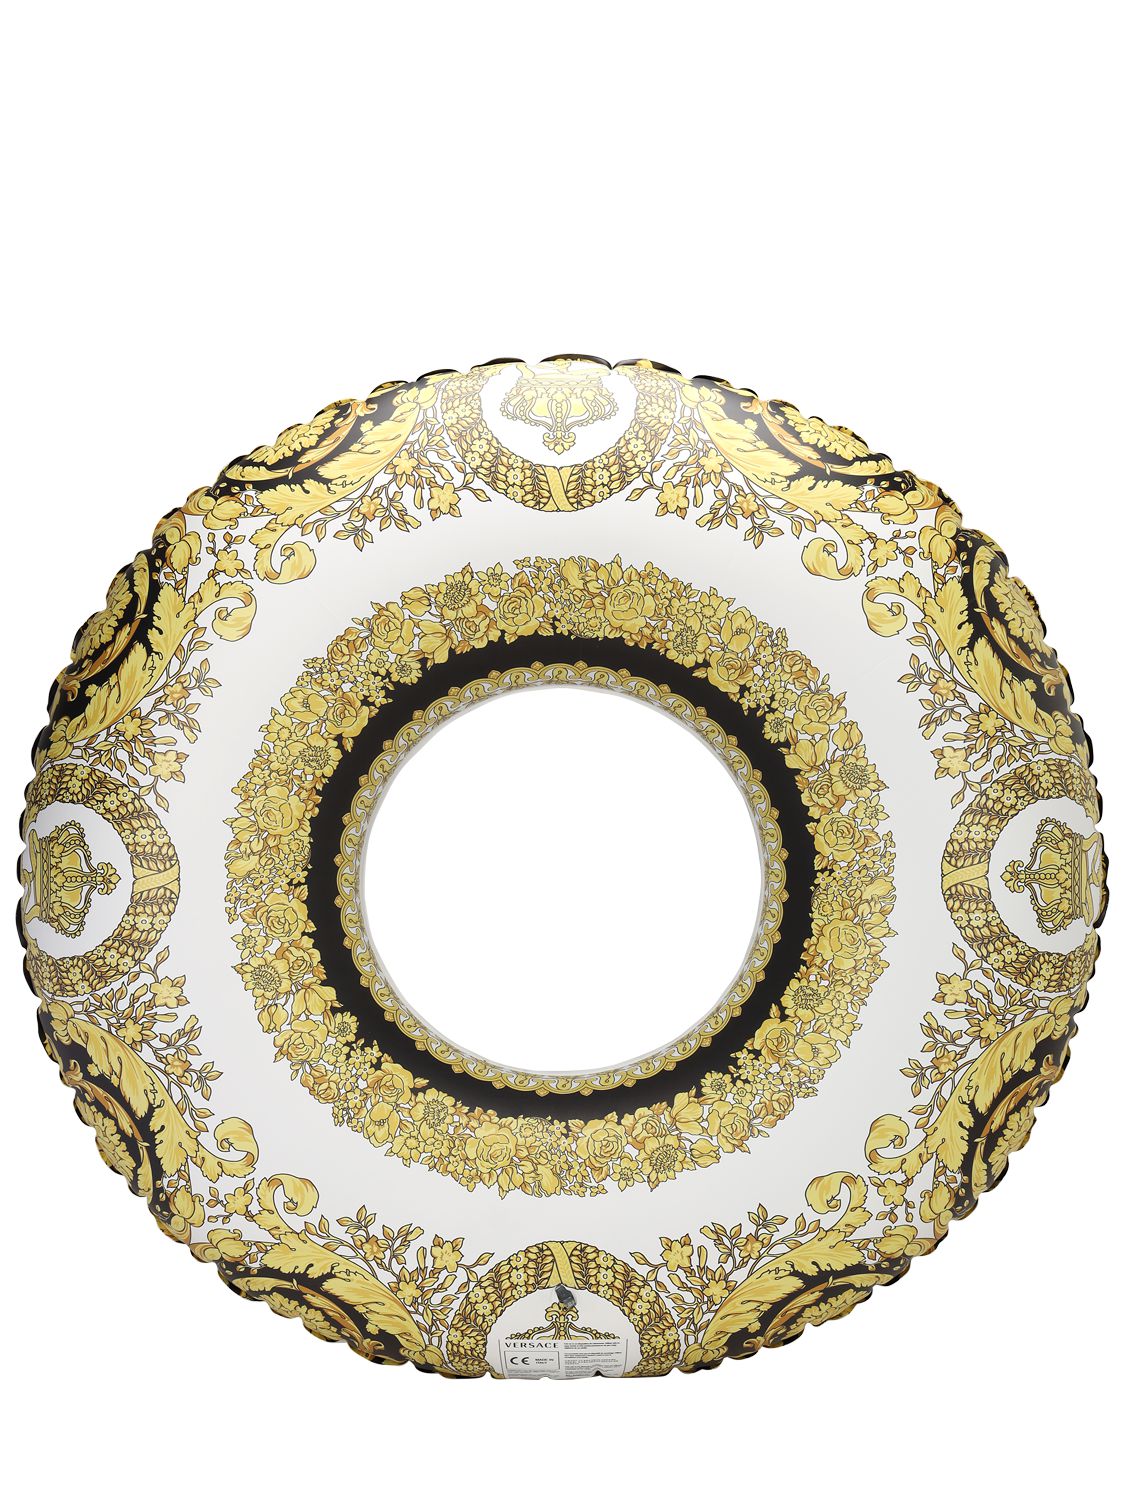 VERSACE PLAY ON PRINTED INFLATABLE RING,75I0X8014-WJCWMTE1